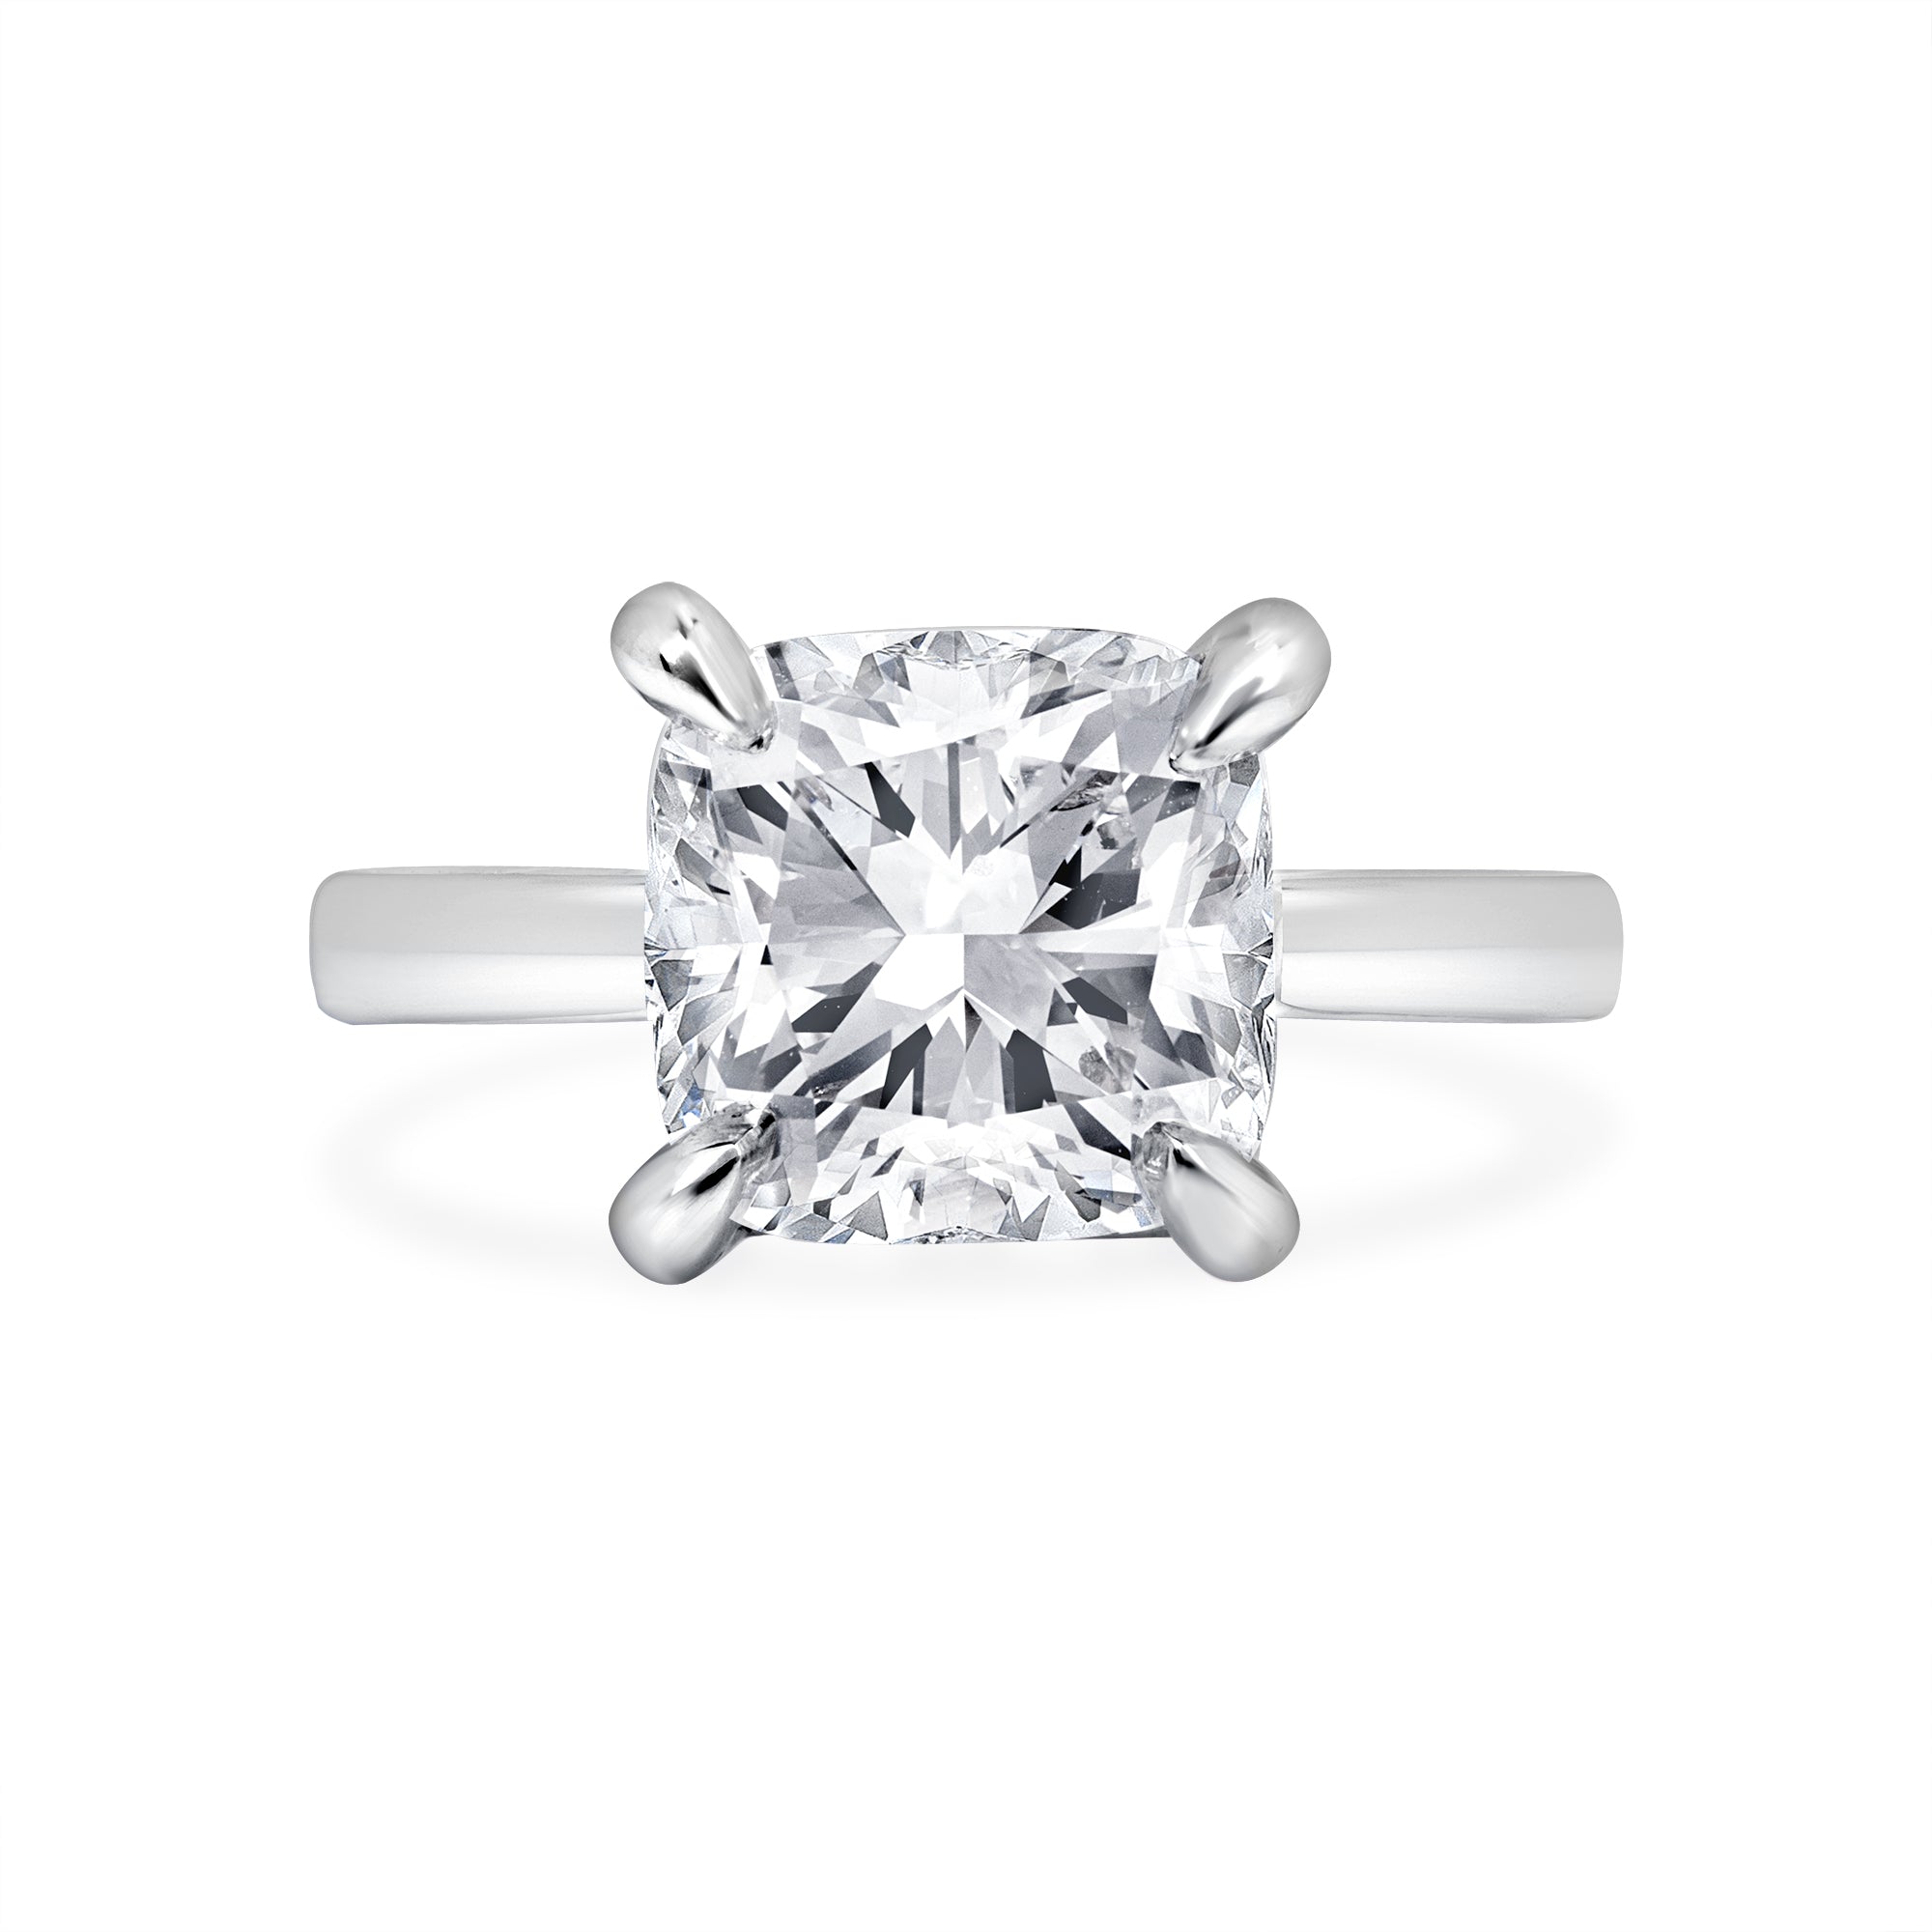 4.08ct Cushion Cut Diamond Solitaire Ring in 18k White Gold Band, GIA Certified